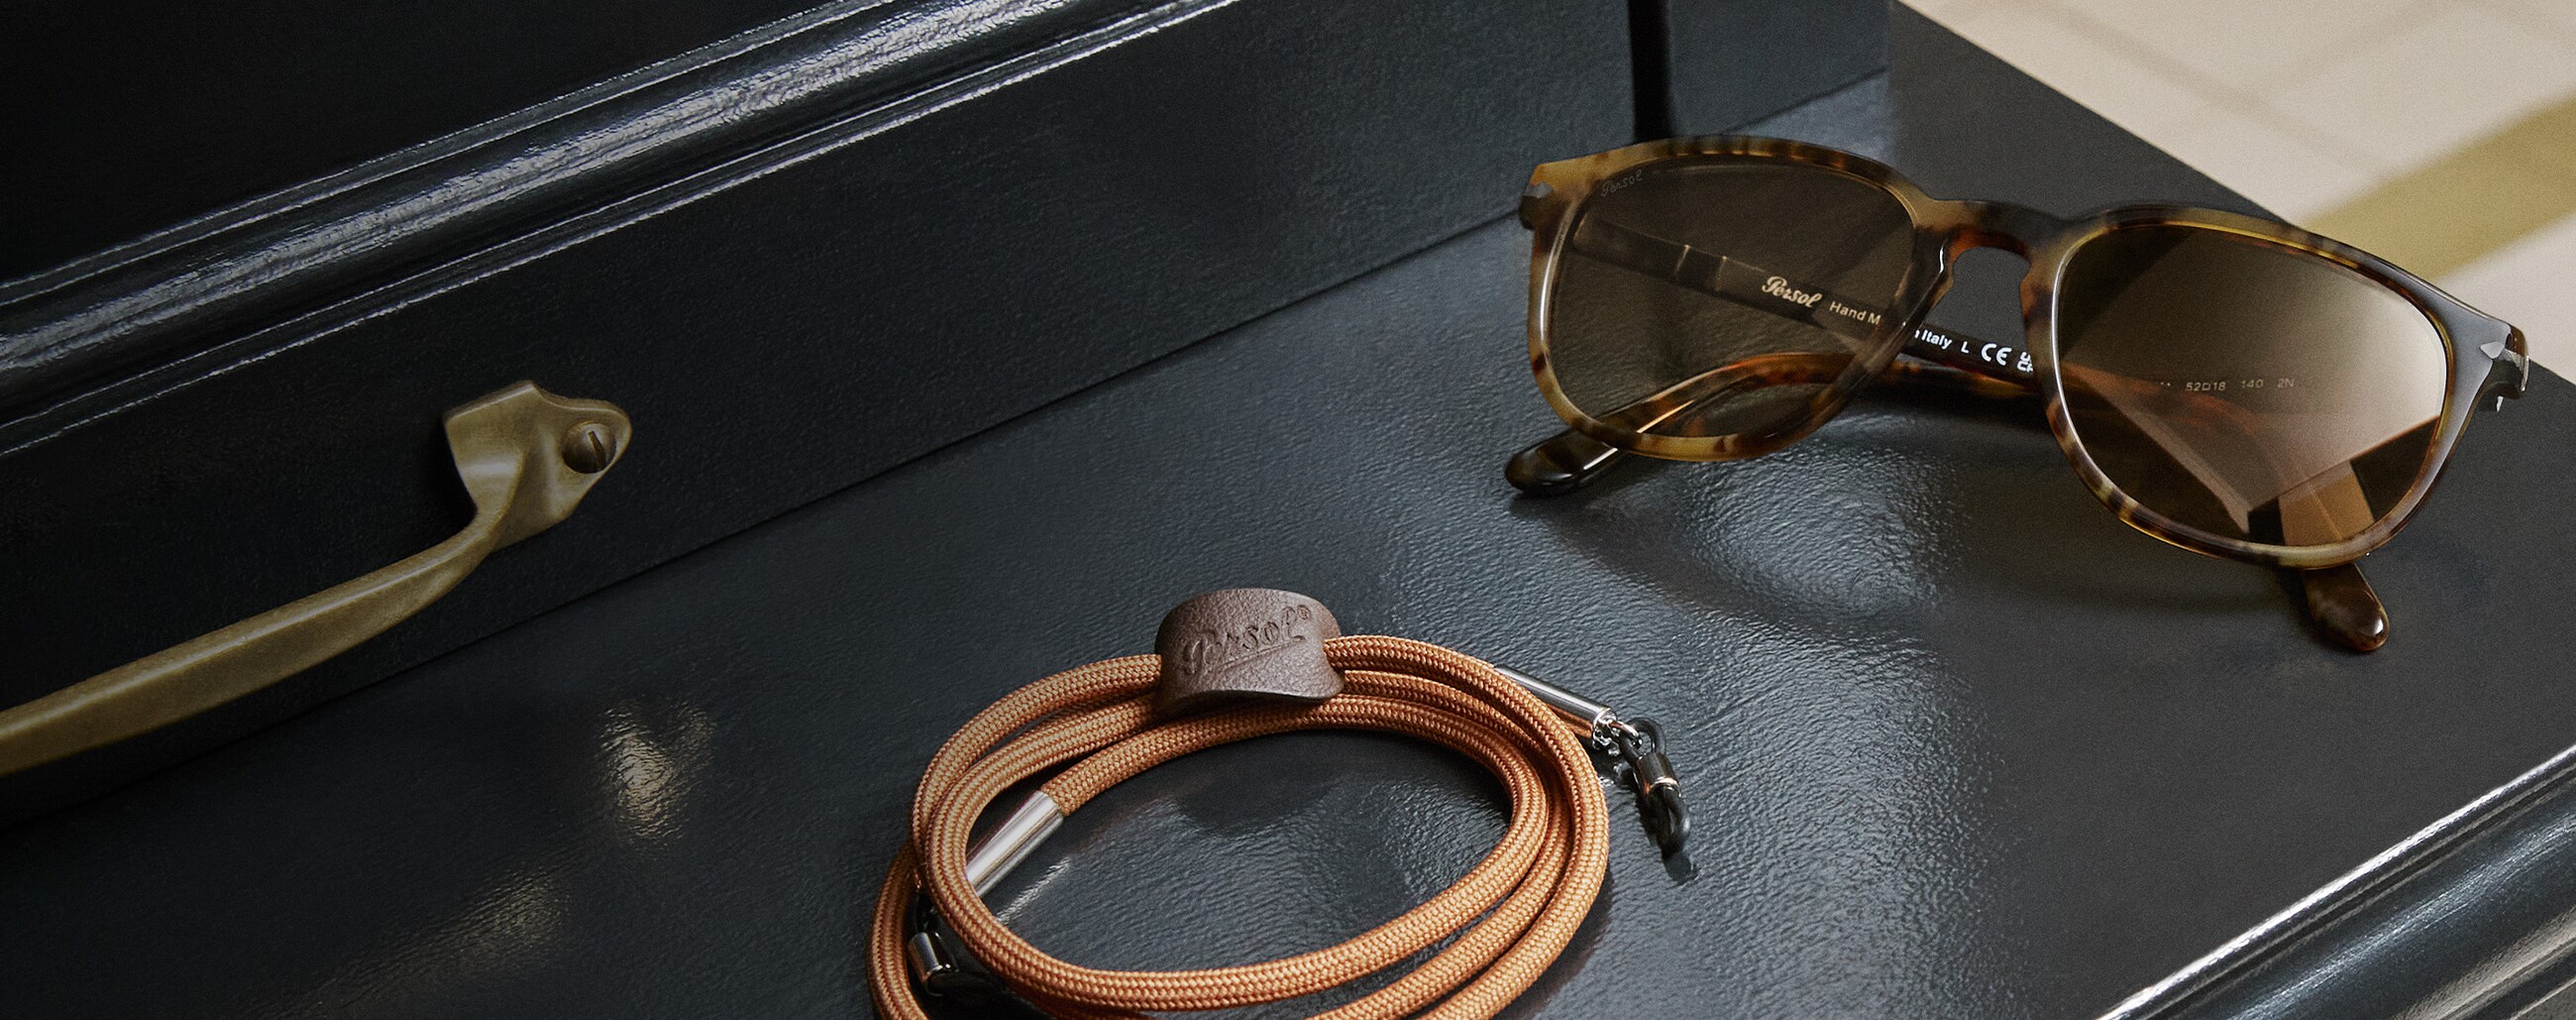 Pineider and Persol. The closeness of Valentine's Day.